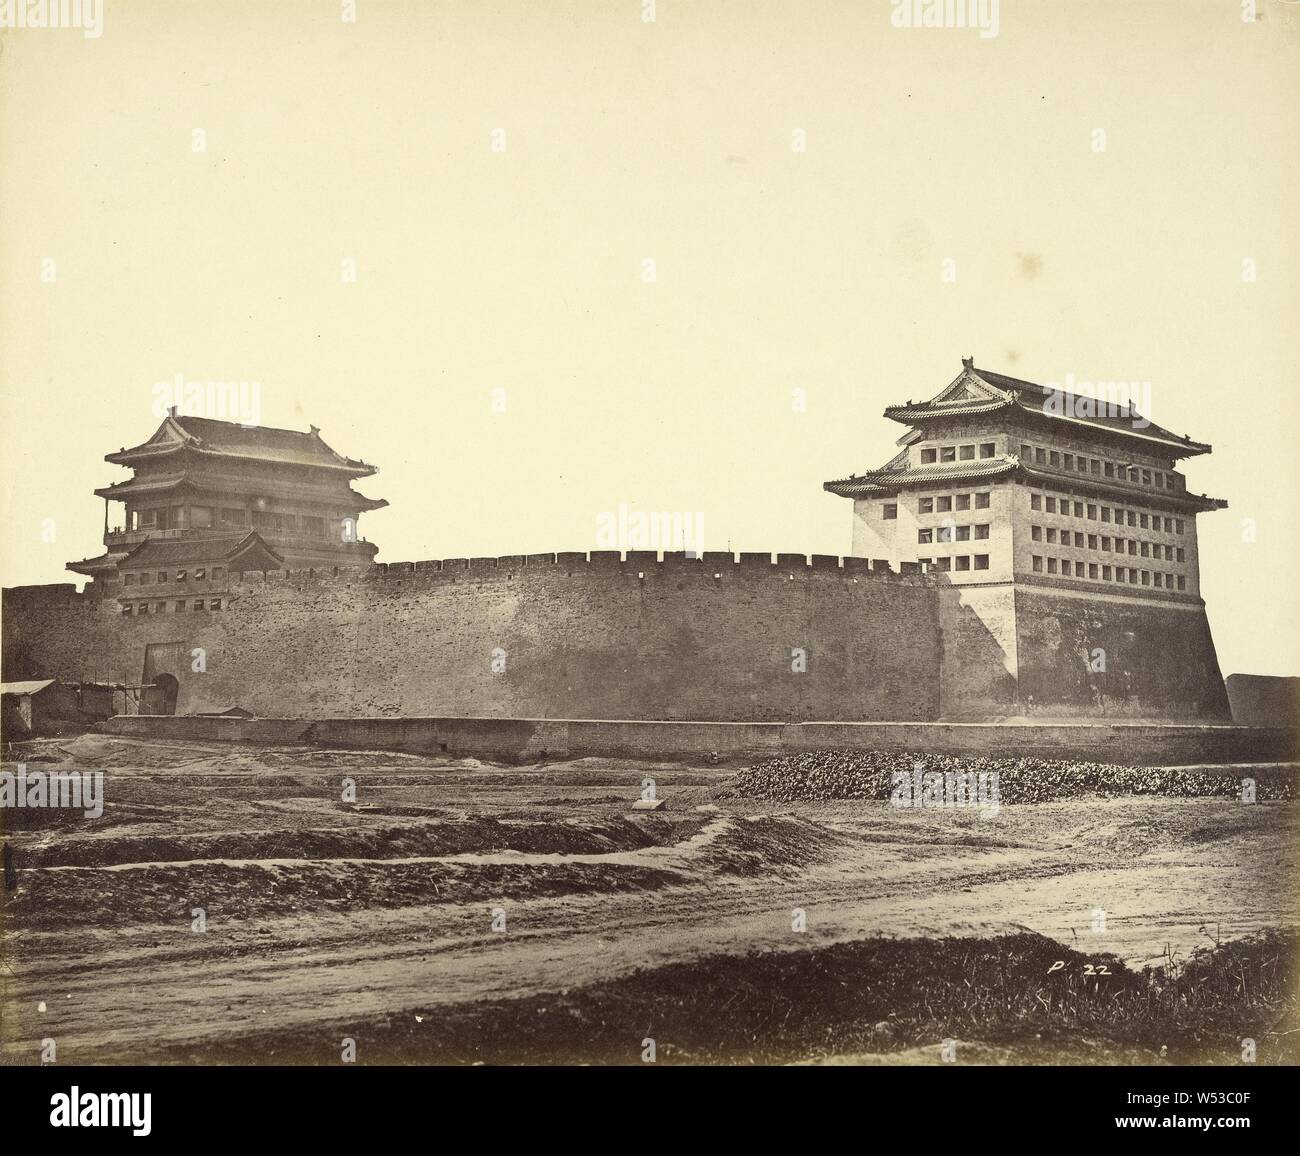 Anting Gate of Peking after the Surrender, Felice Beato (English, born Italy, 1832 - 1909), Henry Hering (British, 1814 - 1893), Pekin, China, 1860, Albumen silver print, 24.5 x 30 cm (9 5/8 x 11 13/16 in Stock Photo